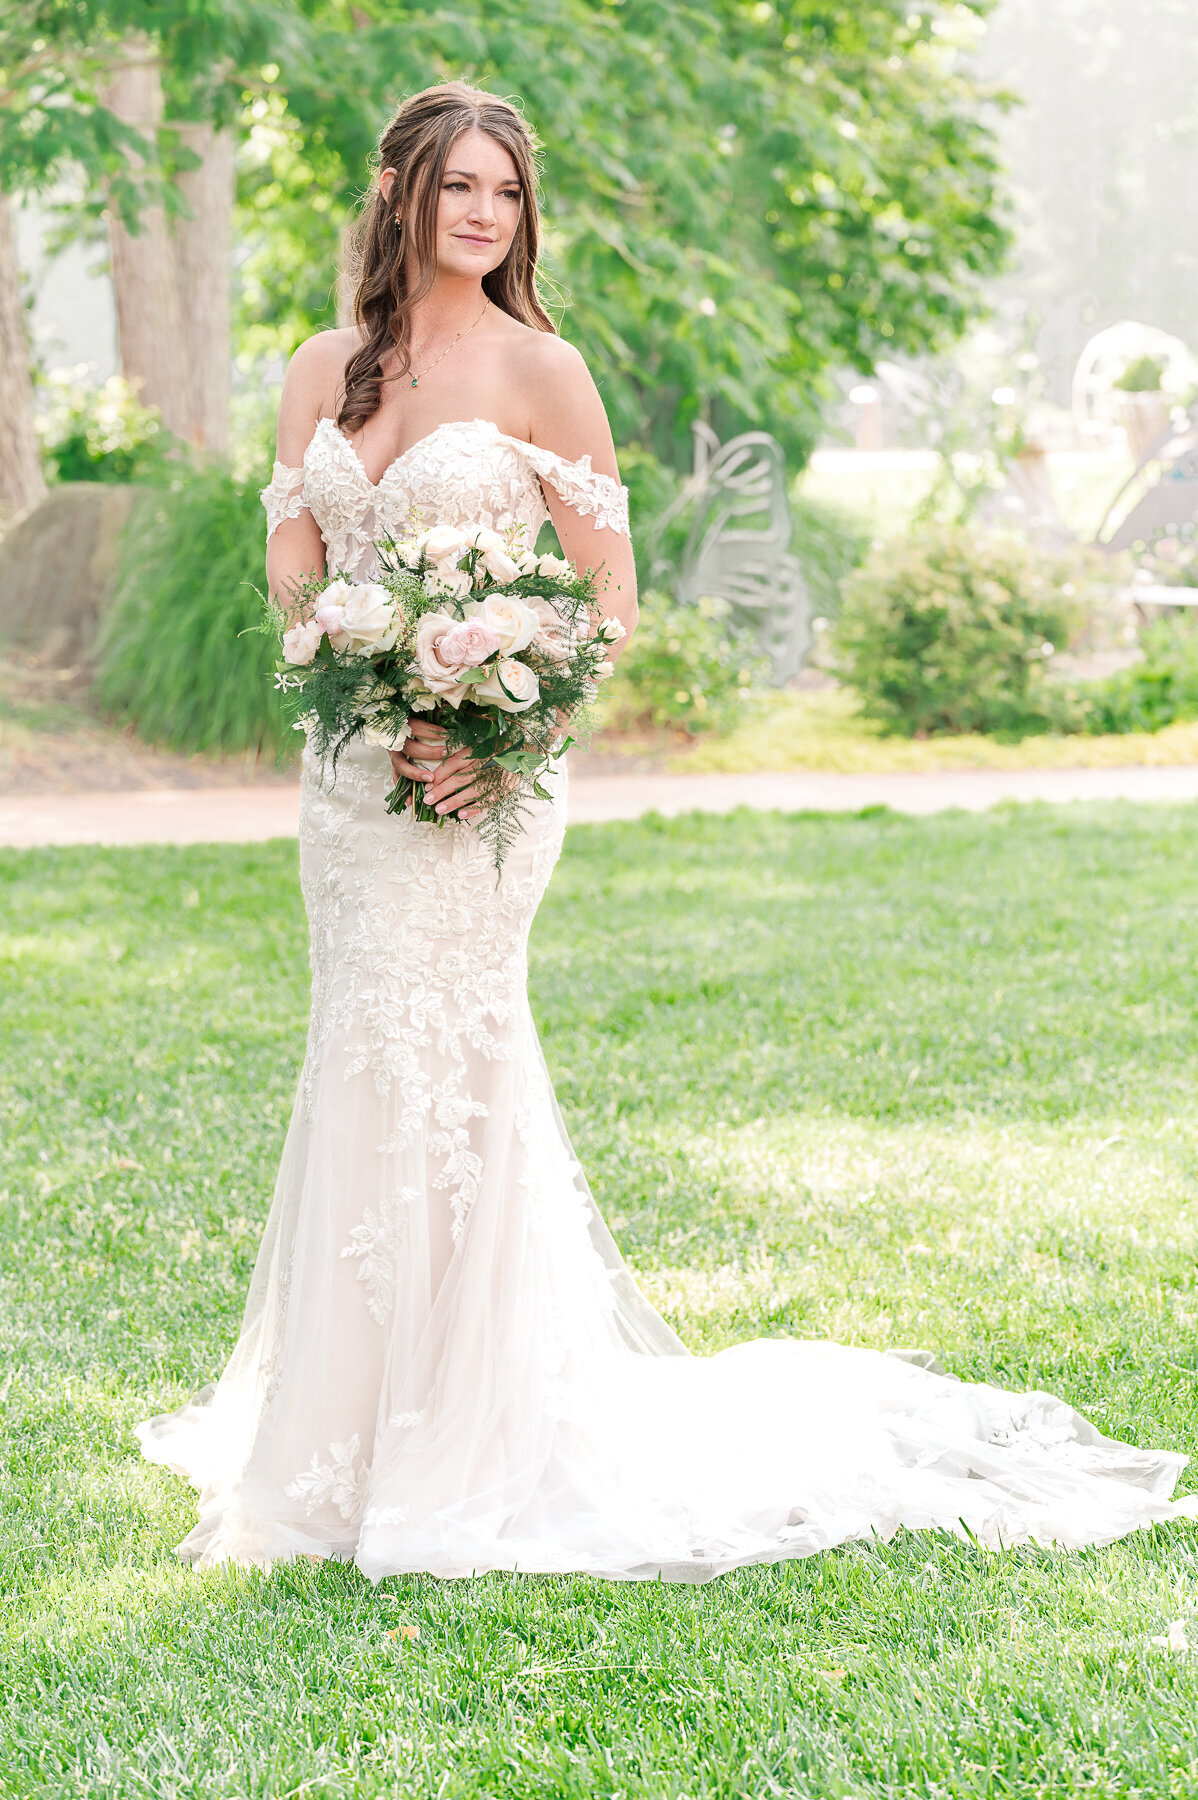 A brunette bride at her bridal session in a Raleigh garden enjoying her North Carolina wedding photos by JoLynn Photography